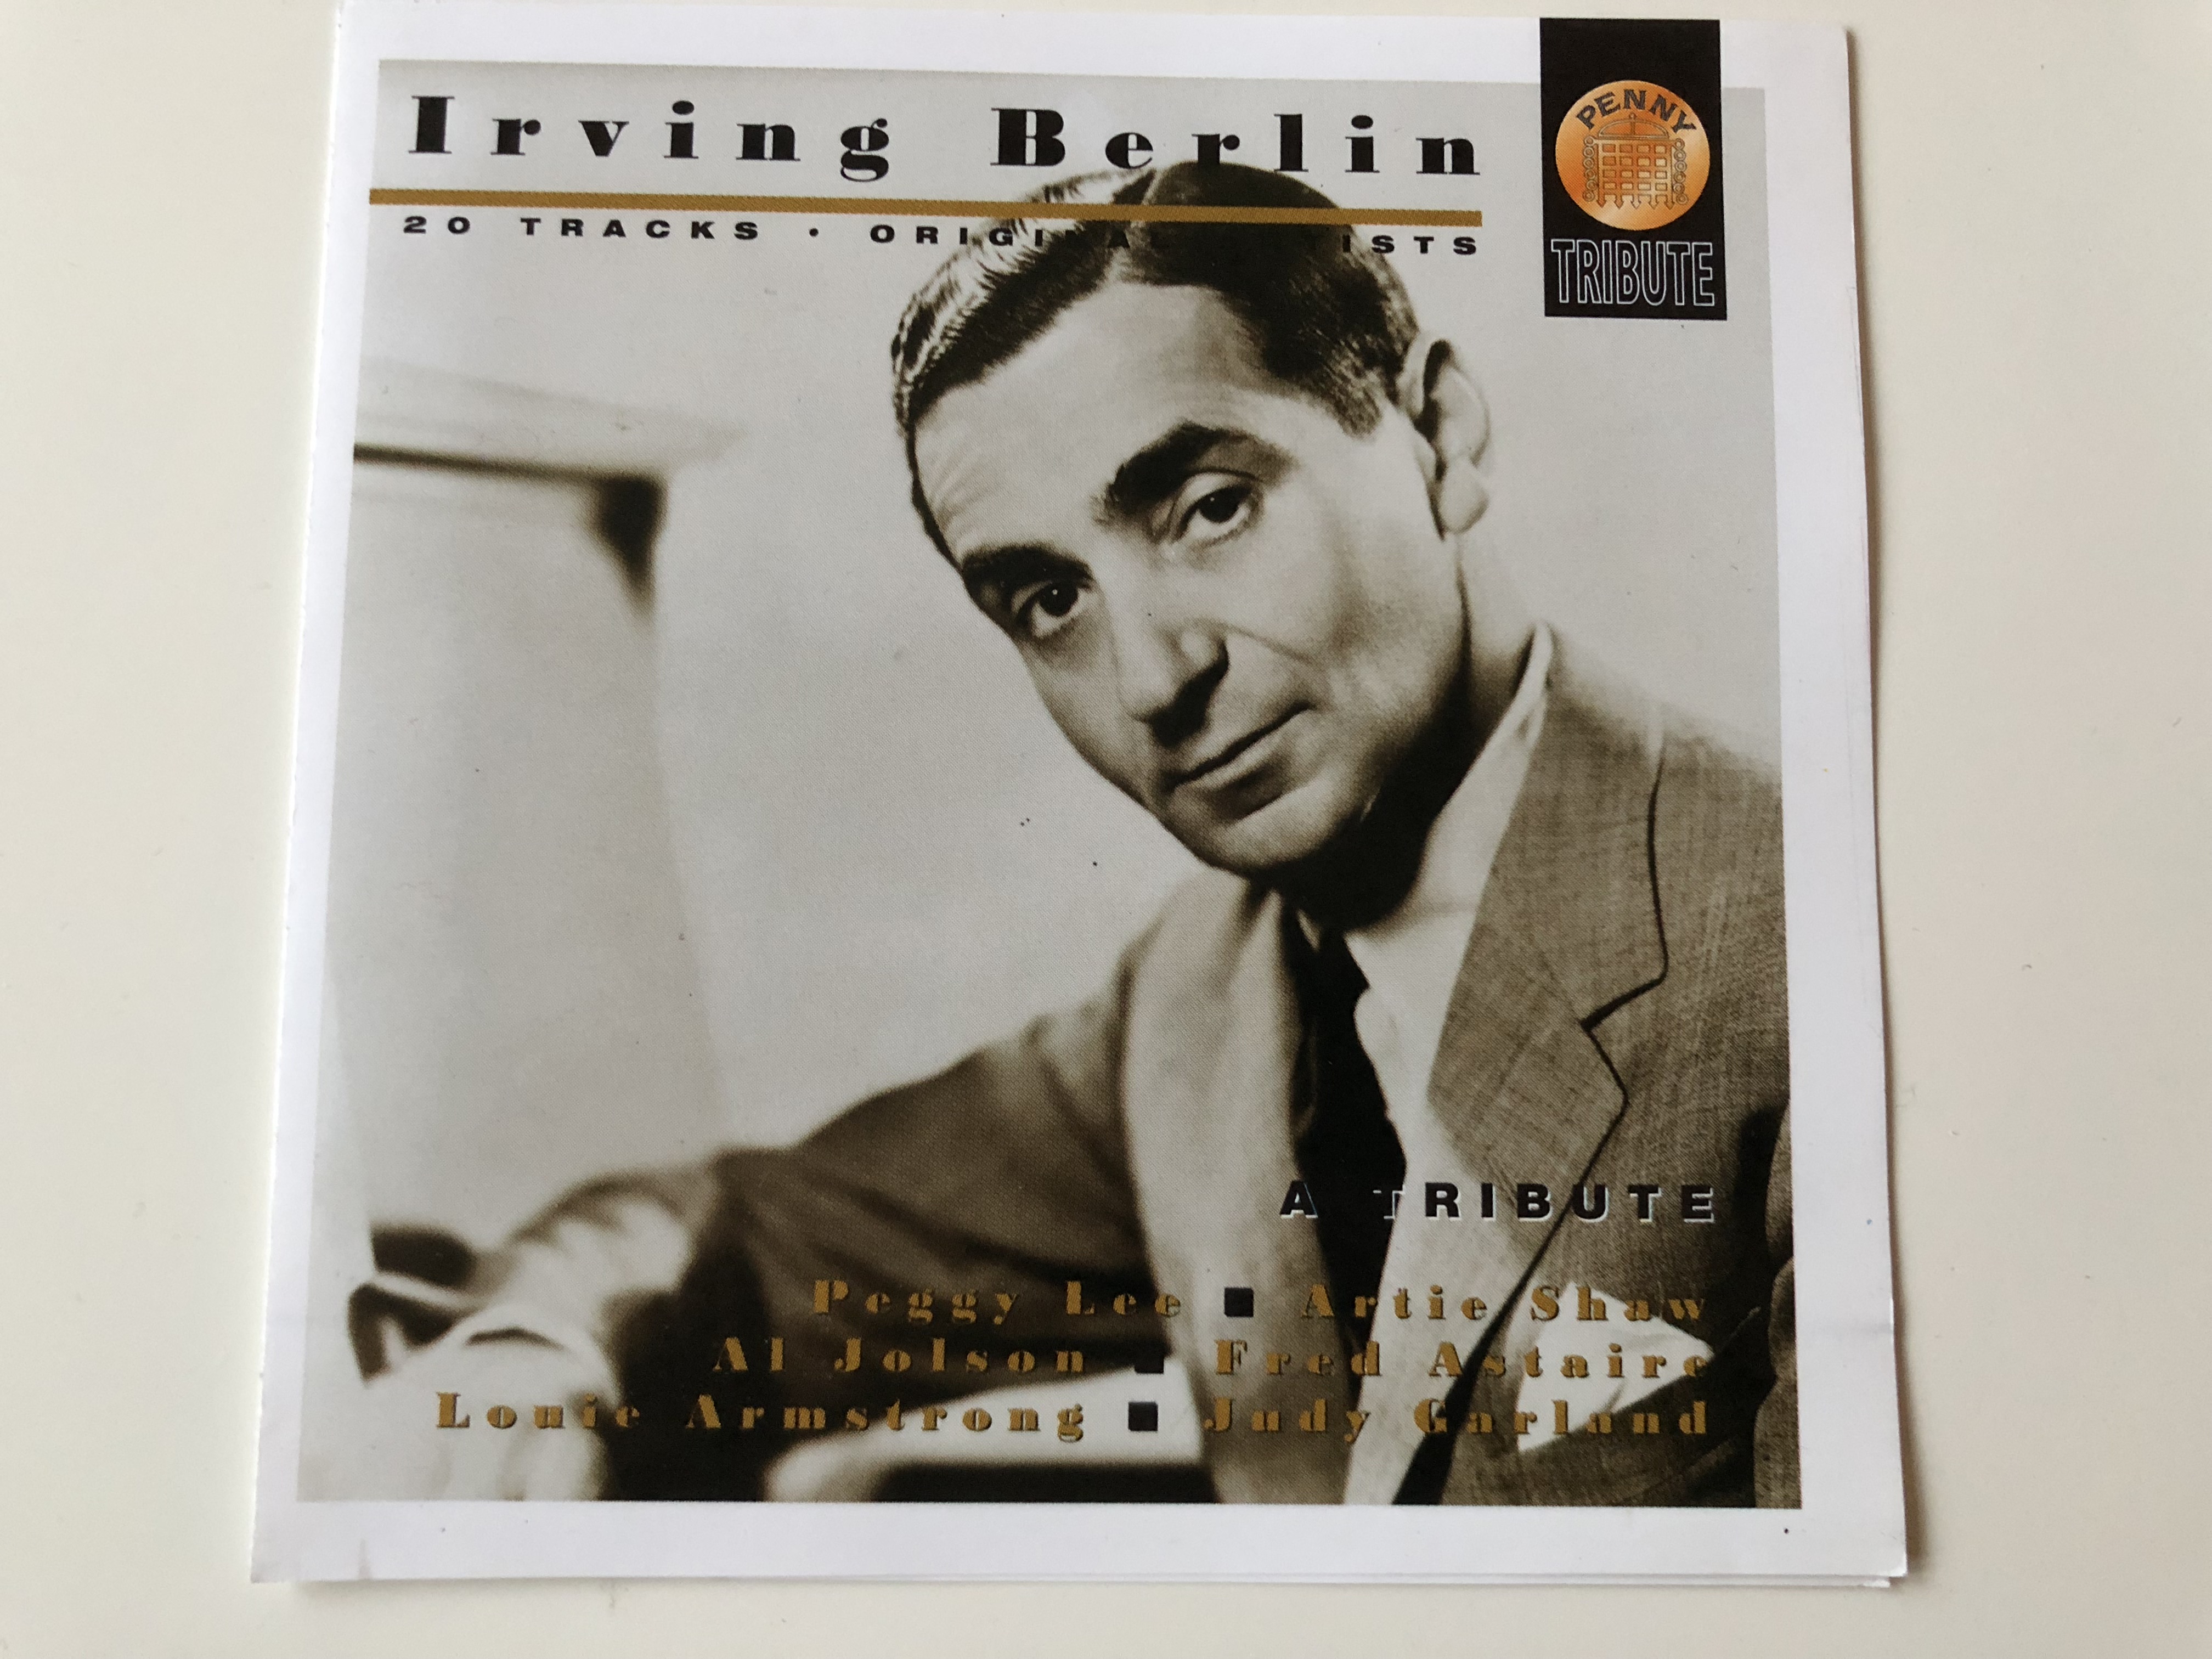 irving-berlin-a-tribute-20-tracks-original-artists-peggy-lee-artie-shaw-al-jolson-fred-astaire-louie-armstrong-judy-garland-audio-cd-1996-pycd-175-1-.jpg